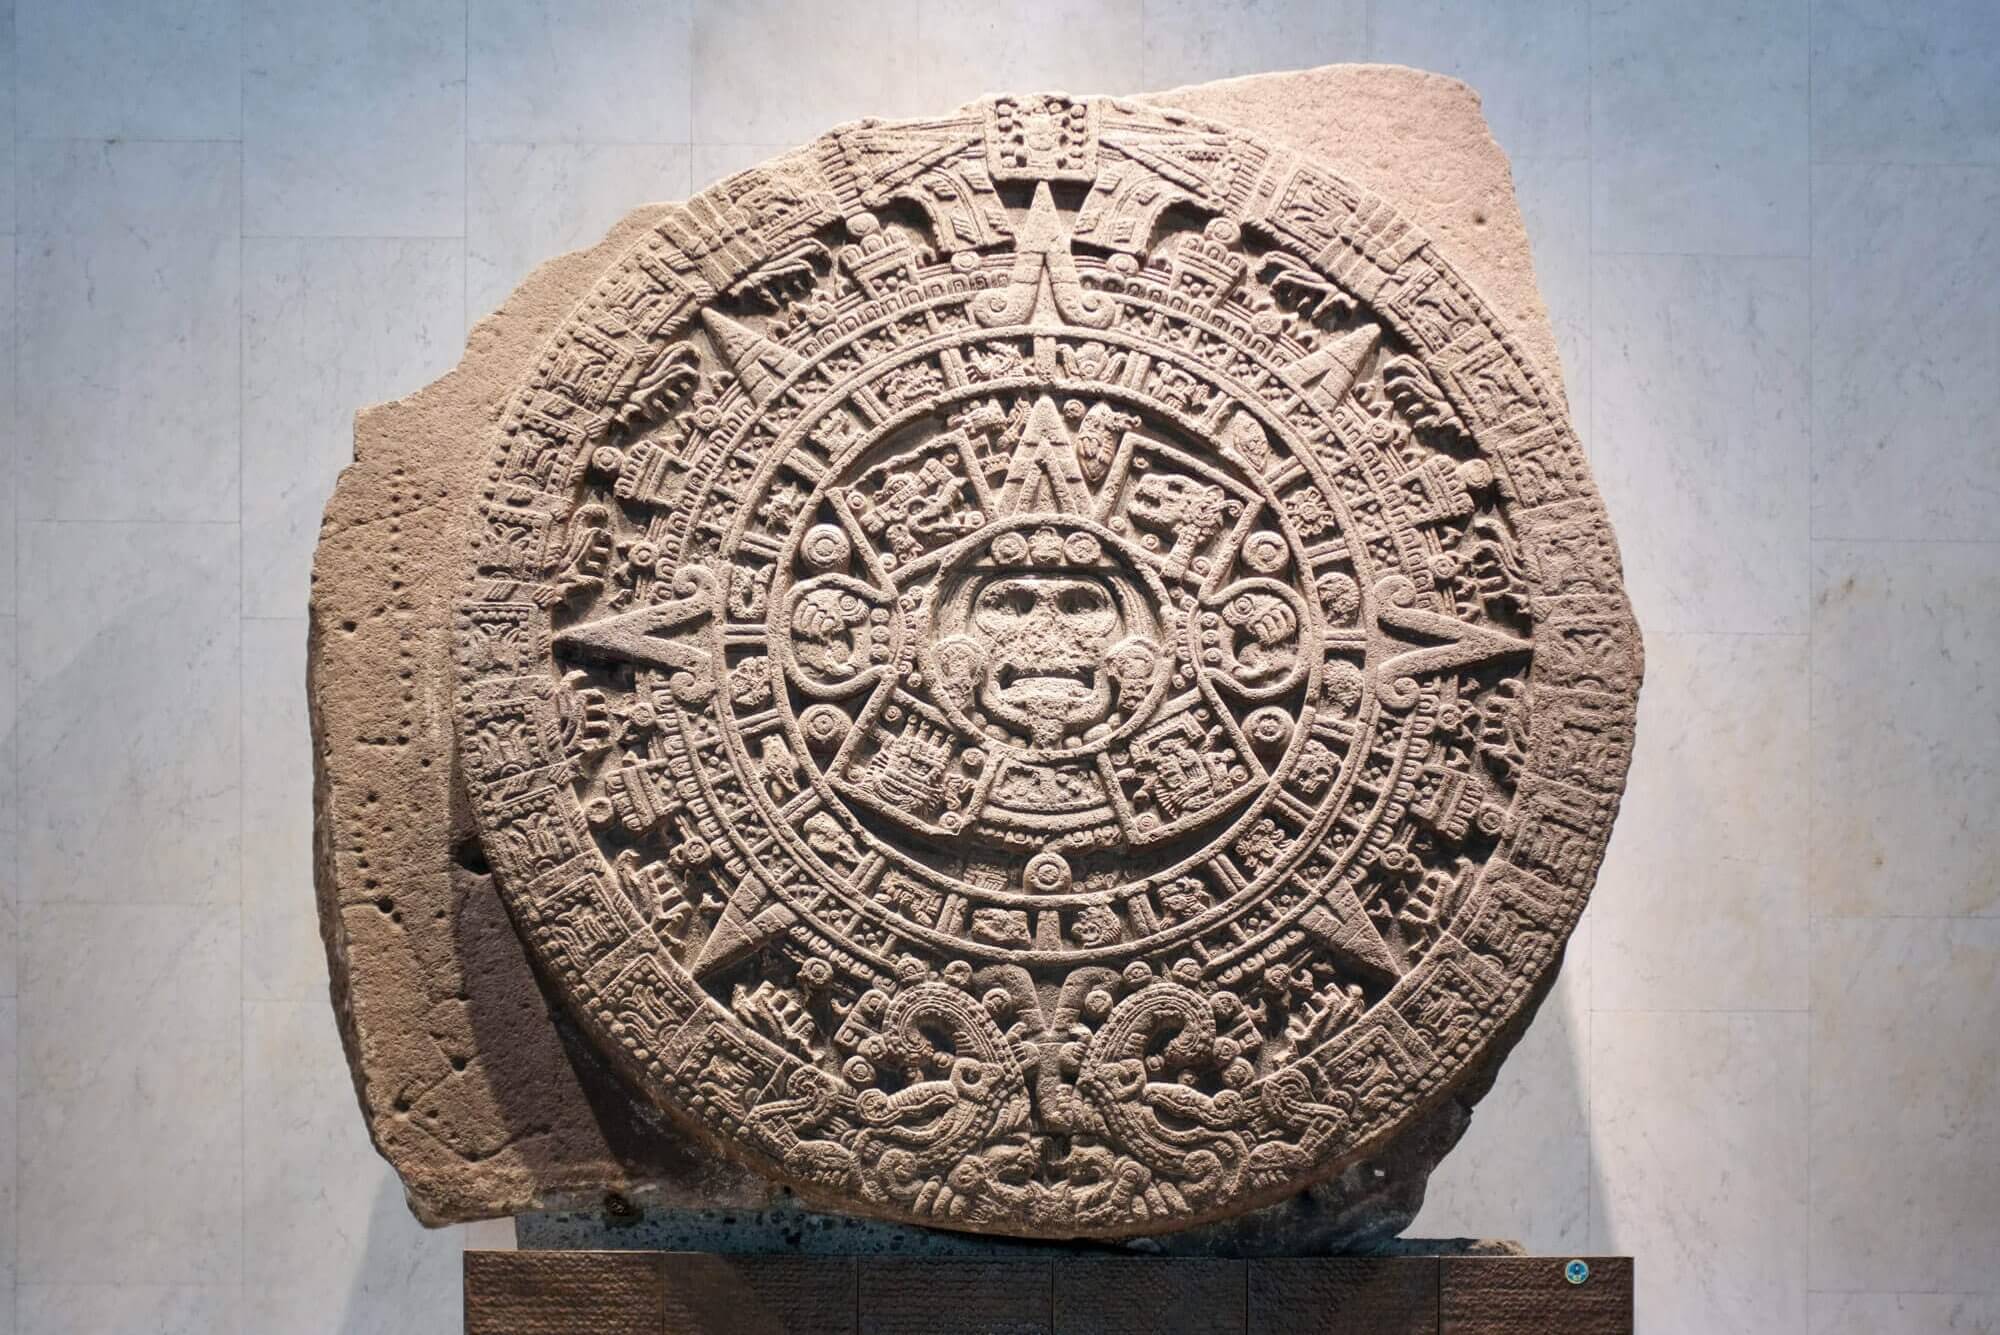 The Sun Stone, or Aztec Calendar Stone, at the National Museum of Anthropology in Mexico City